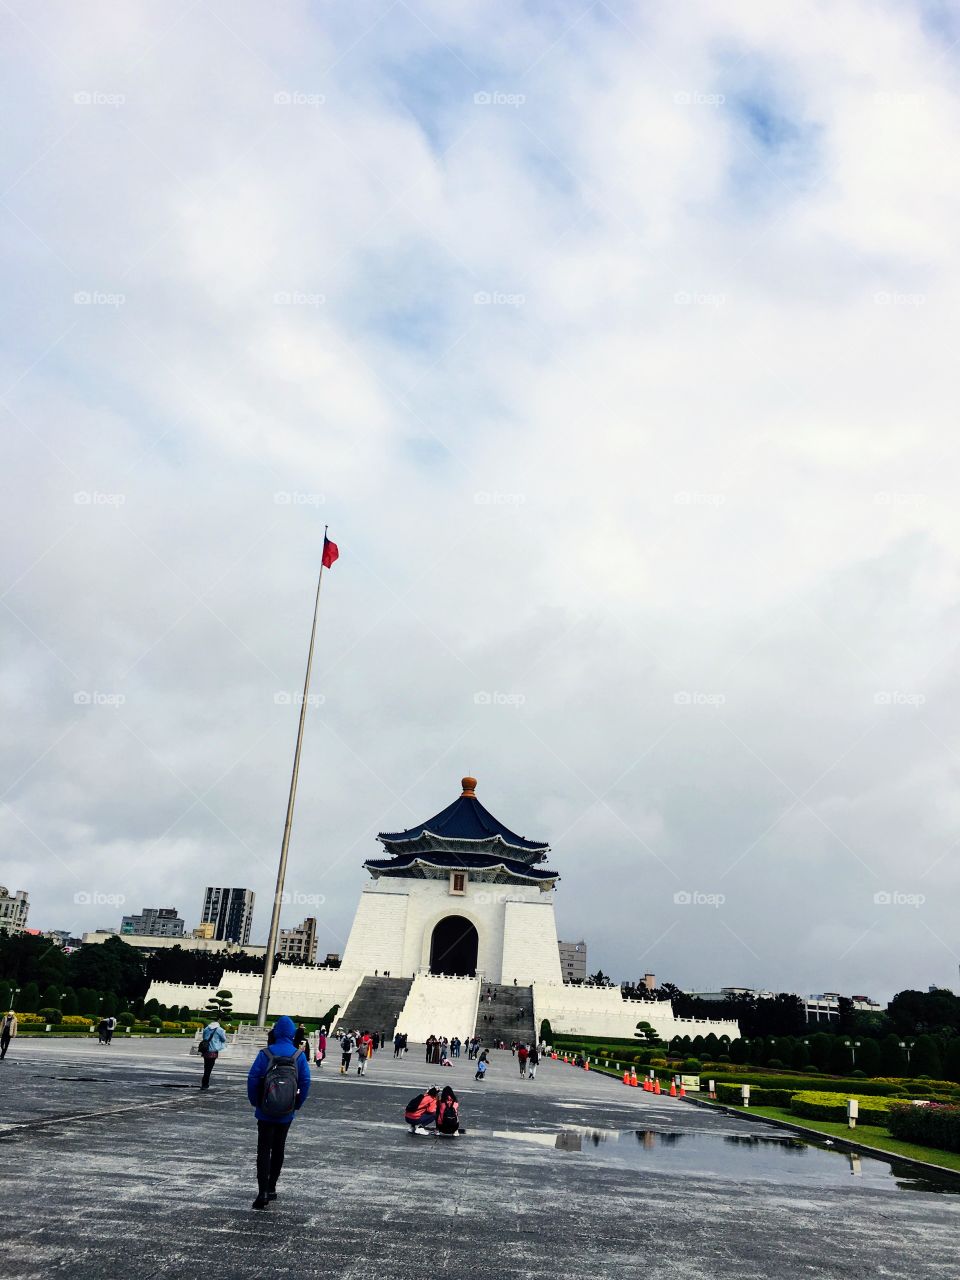 Come with the sense of this old structure one of the beautiful wonders of Taiwan, The famous Chiang Kai-Shek Memorial Hall